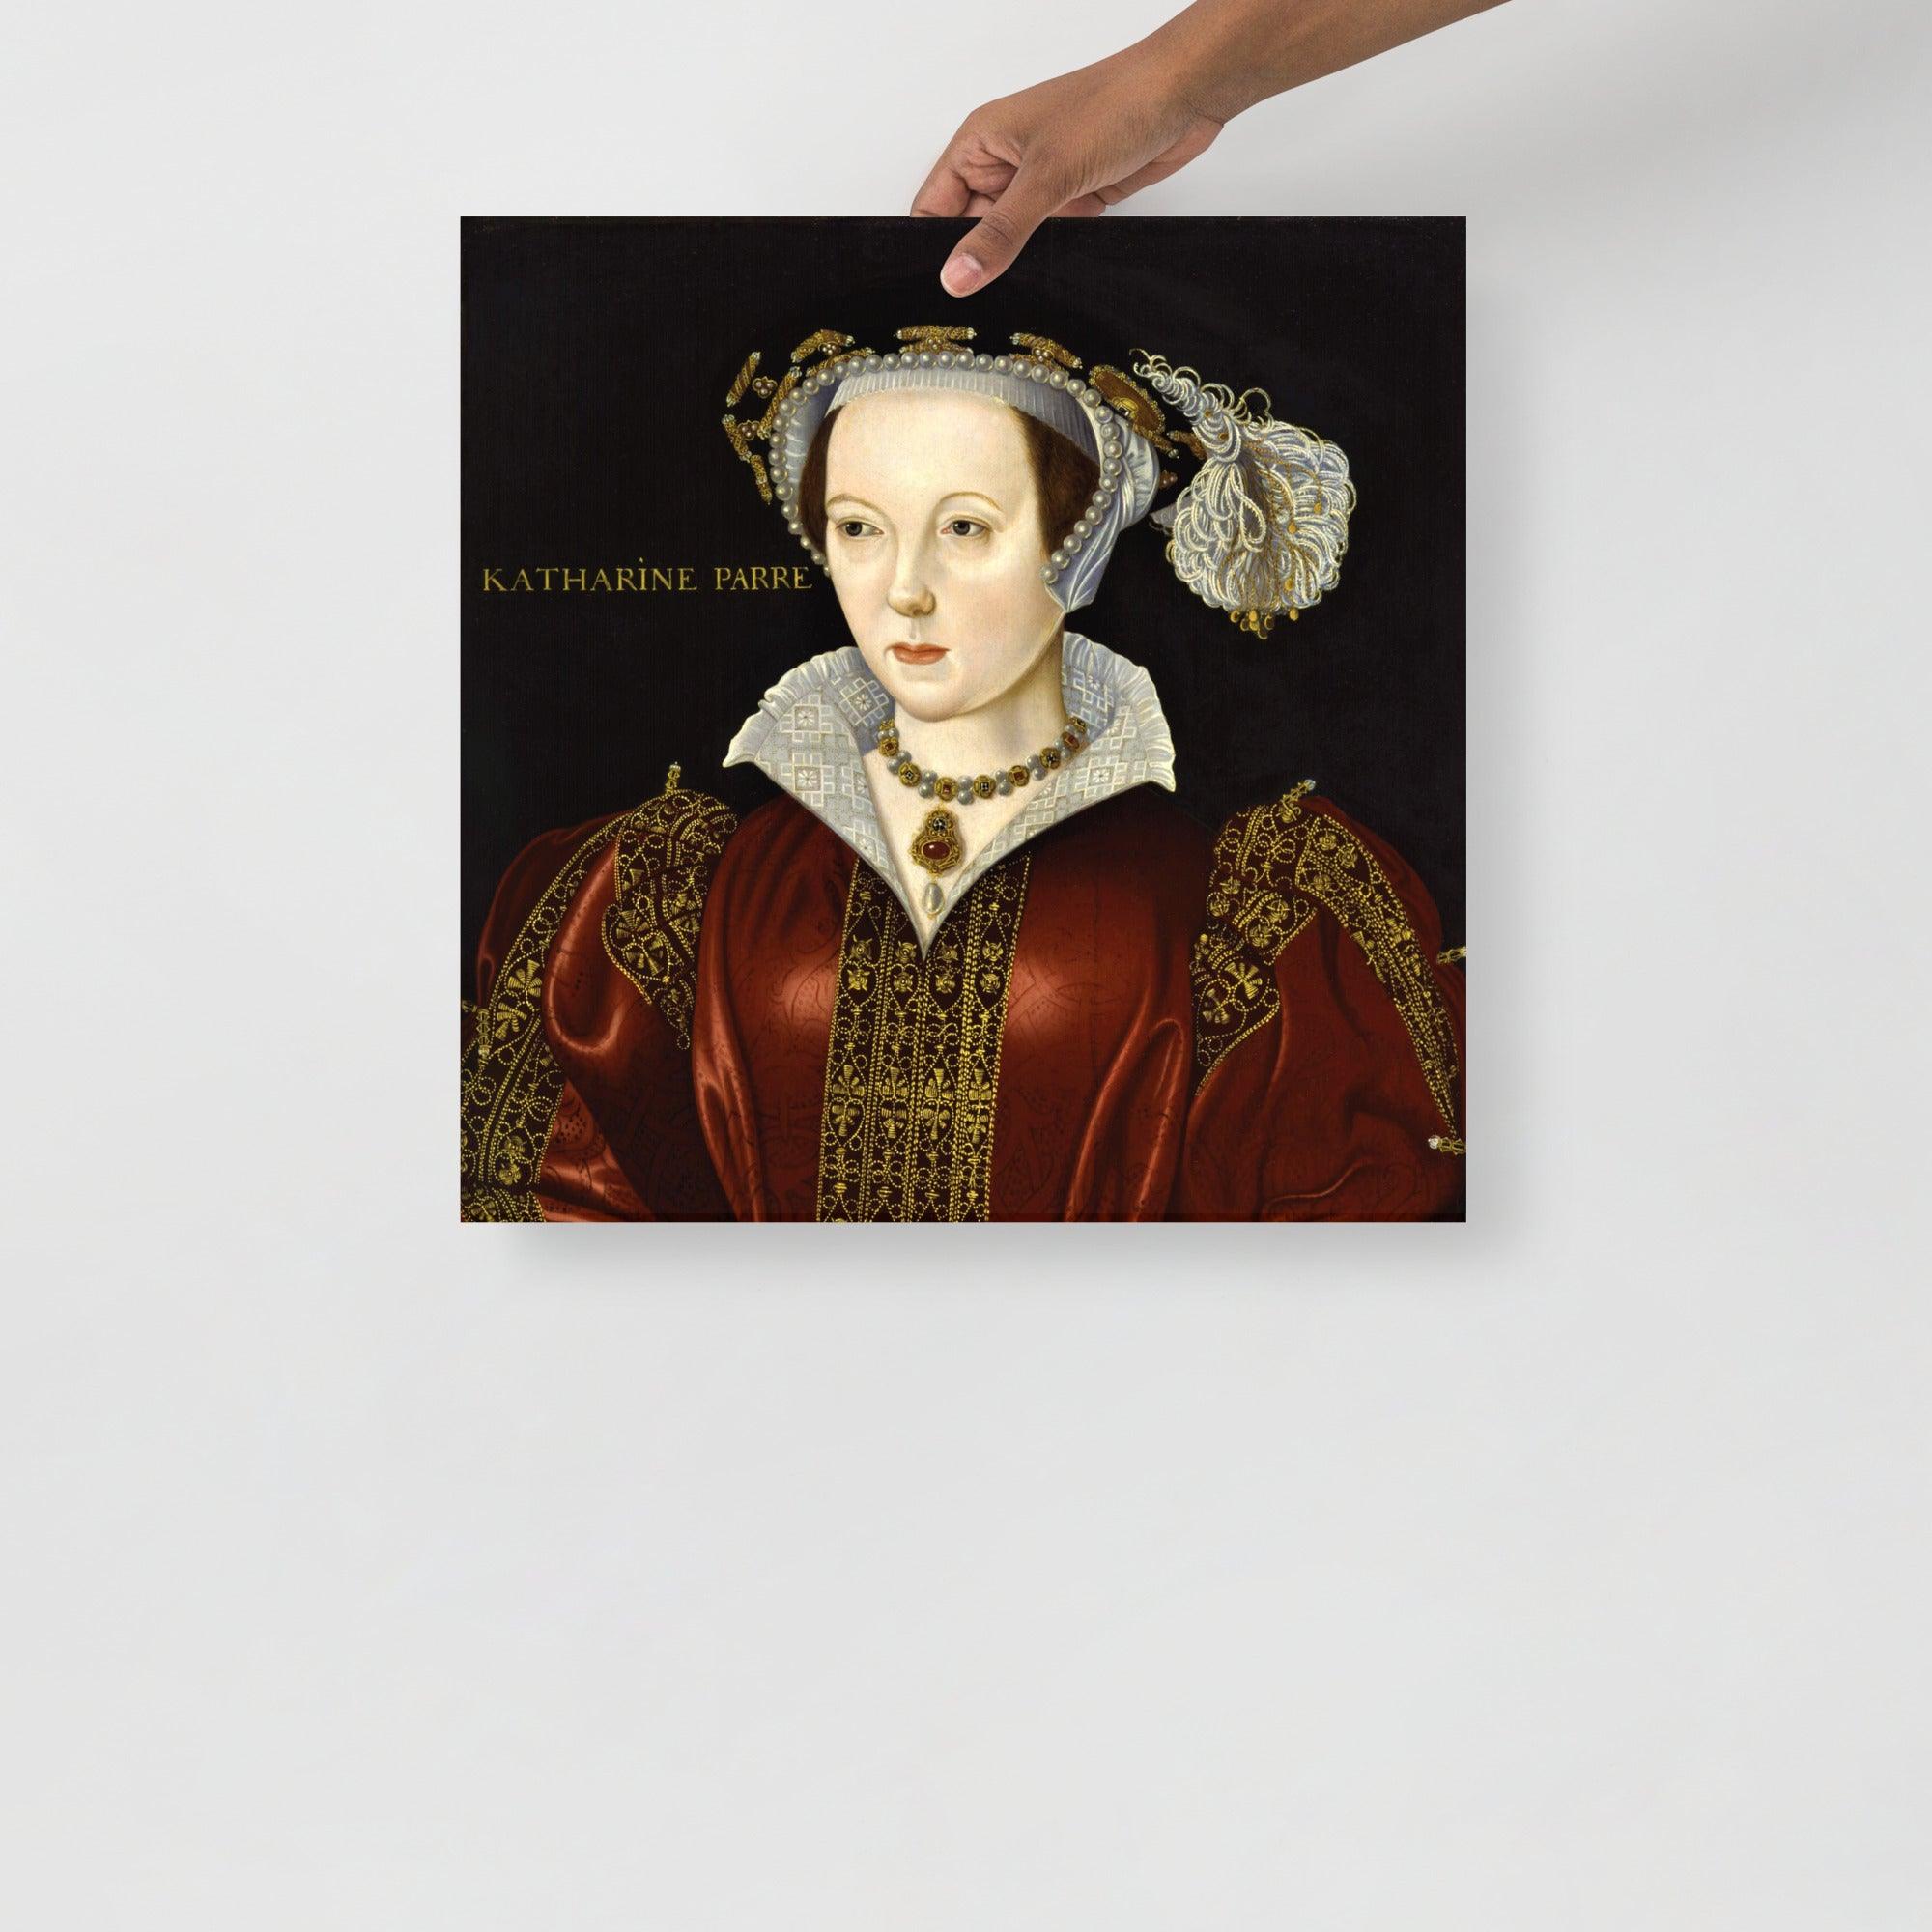 A Catherine Parr poster on a plain backdrop in size 18x18”.